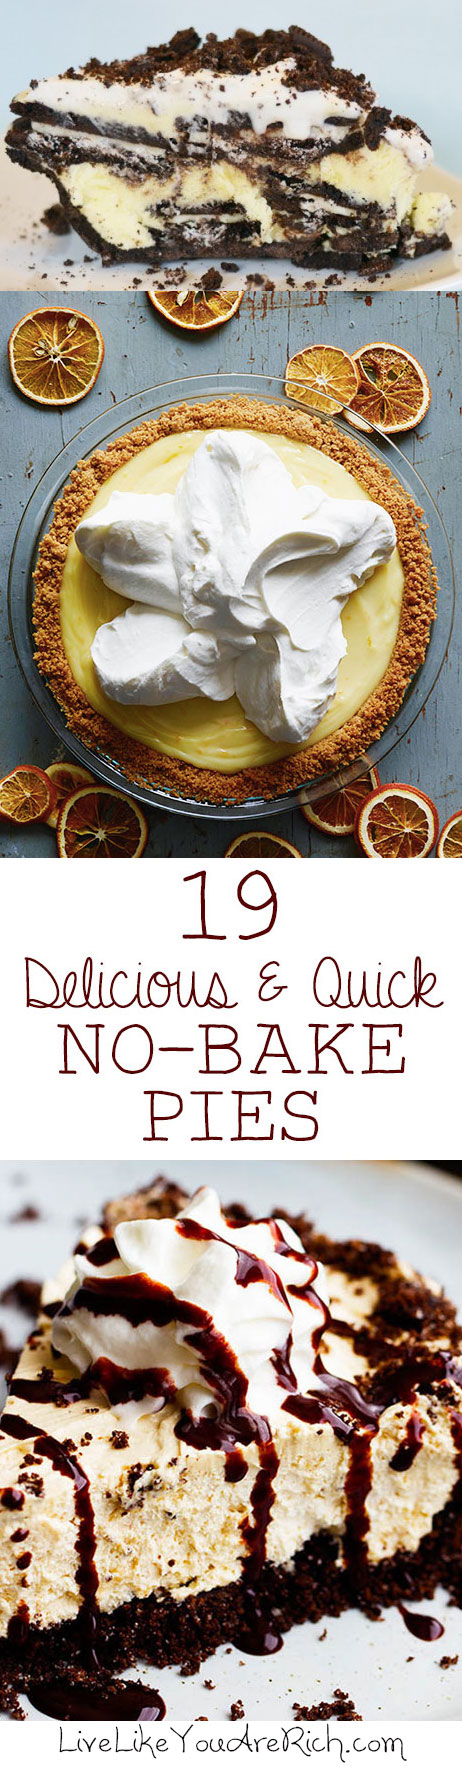 No-bake pies are so easy and quick (especially if you buy pre-made crusts). They can be thrown together in just a few minutes of prep and a few hours of chilling. They are a great idea for contributing to a party, potluck, or dinner. So, I thought I’d do a round-up that I can refer to for ideas on quick and easy no-bake pie desserts. And I’m super impressed by all of the options. I hope you enjoy them too!